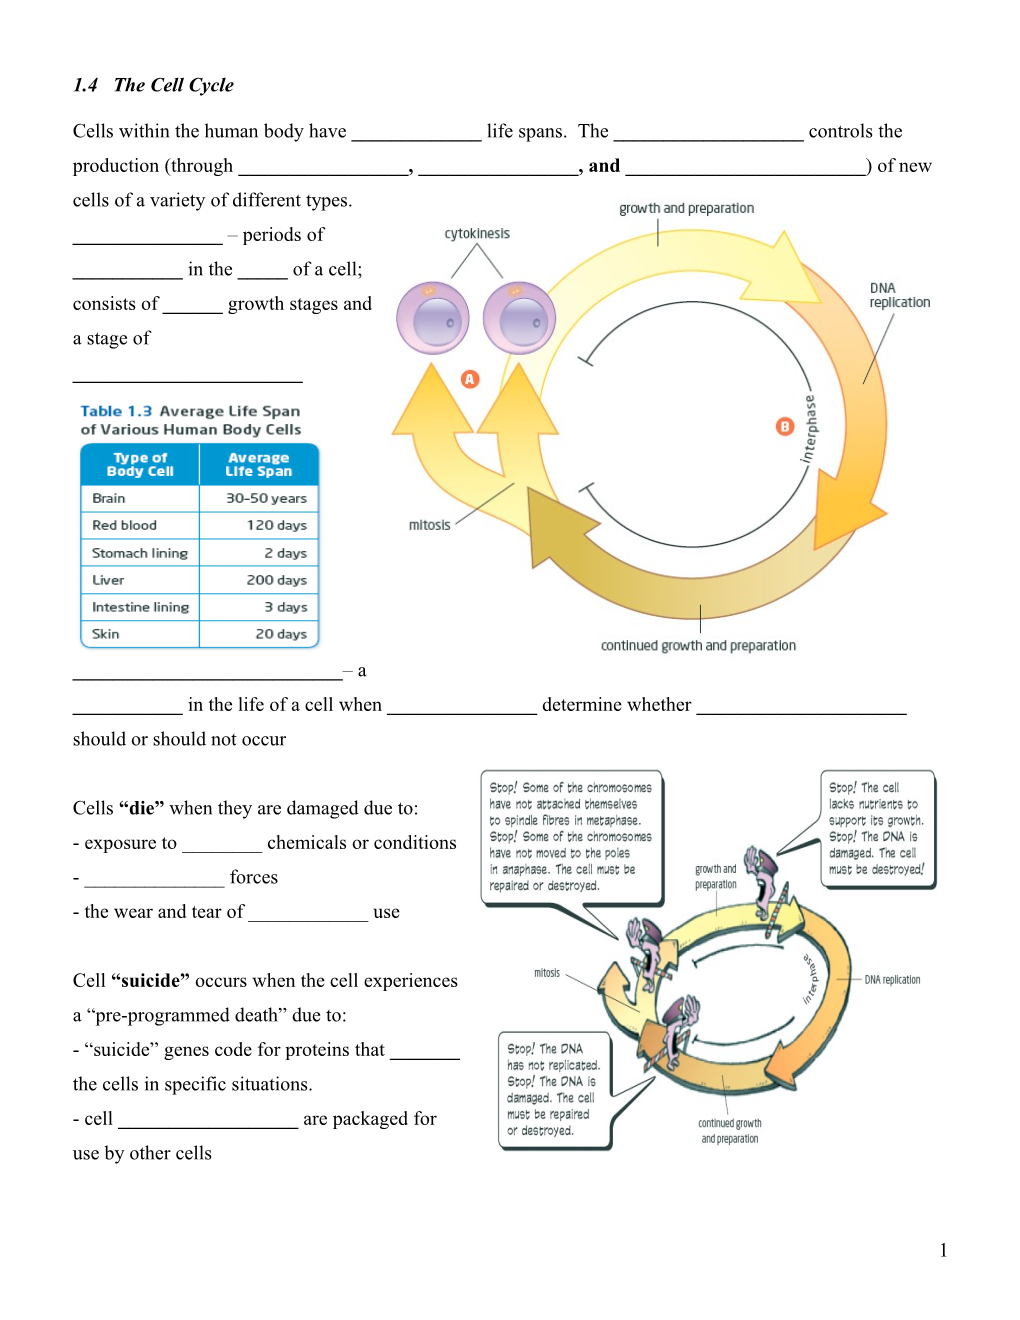 1.4 the Cell Cycle